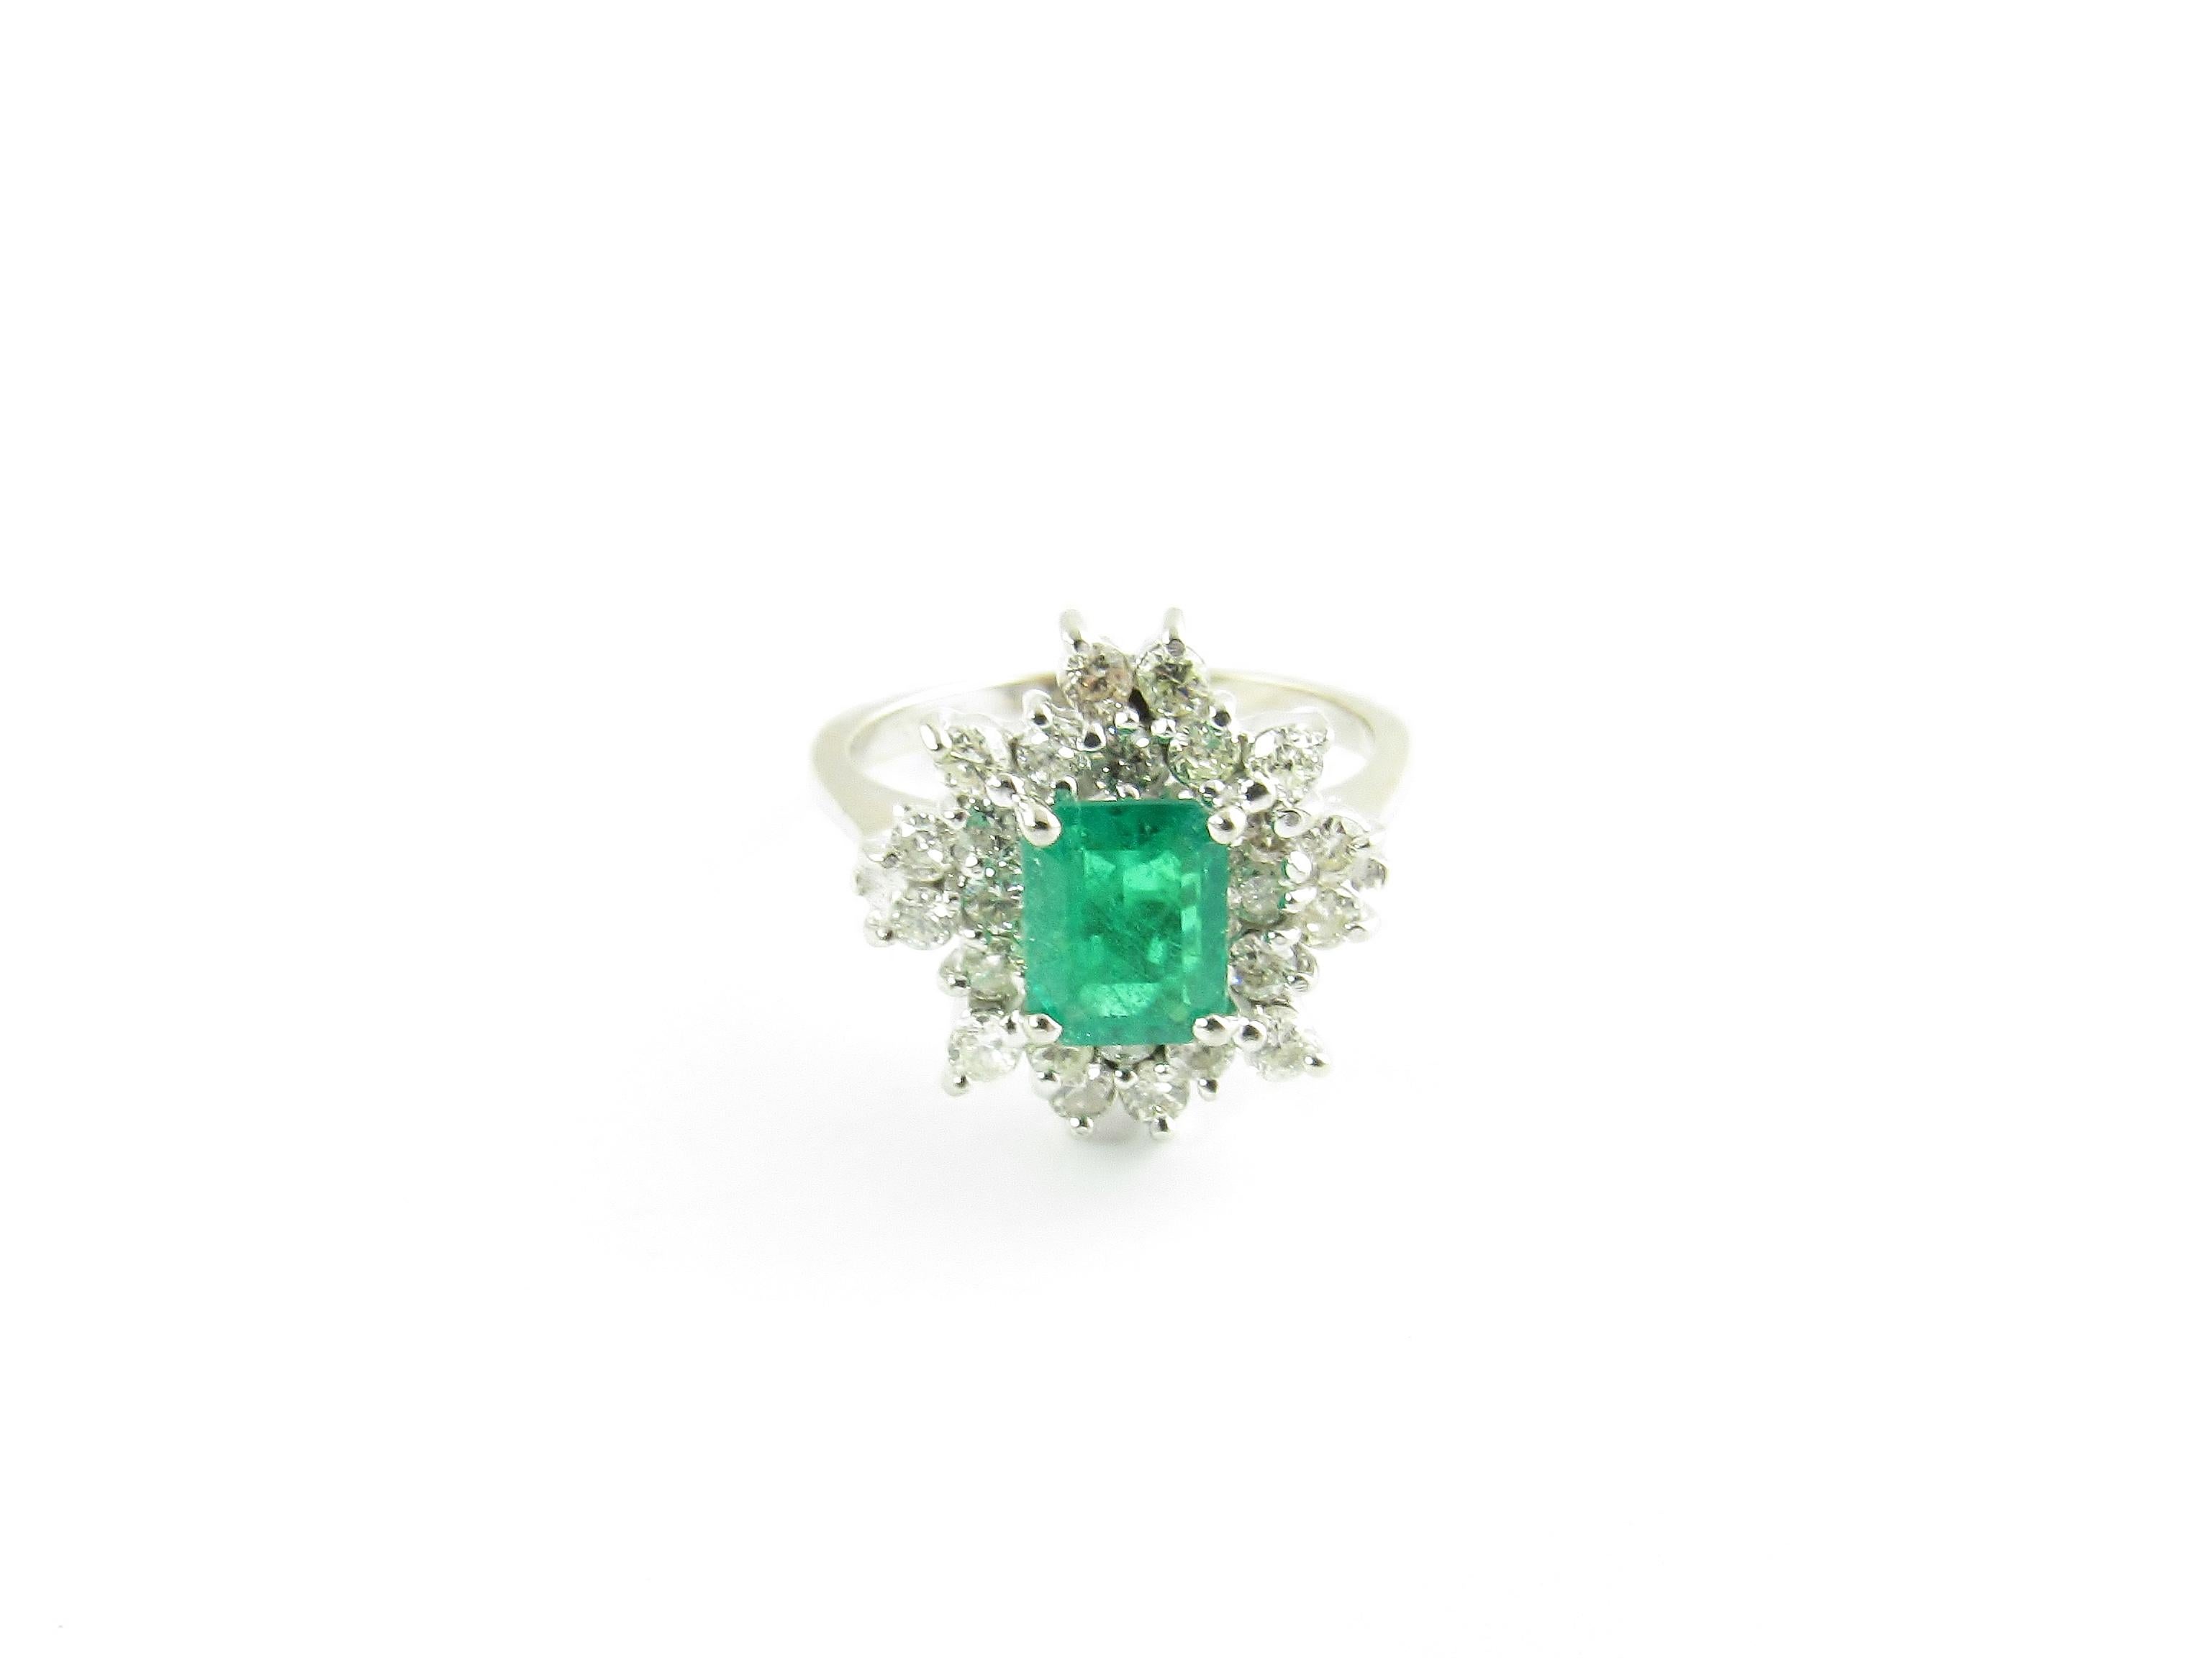 Vintage 18 Karat White Gold Emerald and Diamond Ring Size 7-

This stunning ring features one emerald cut emerald (7 mm x 5 mm) surrounded by 24 round brilliant cut diamonds set in classic 14K white gold. Top of ring measures 15 mm x 15 mm. Shank